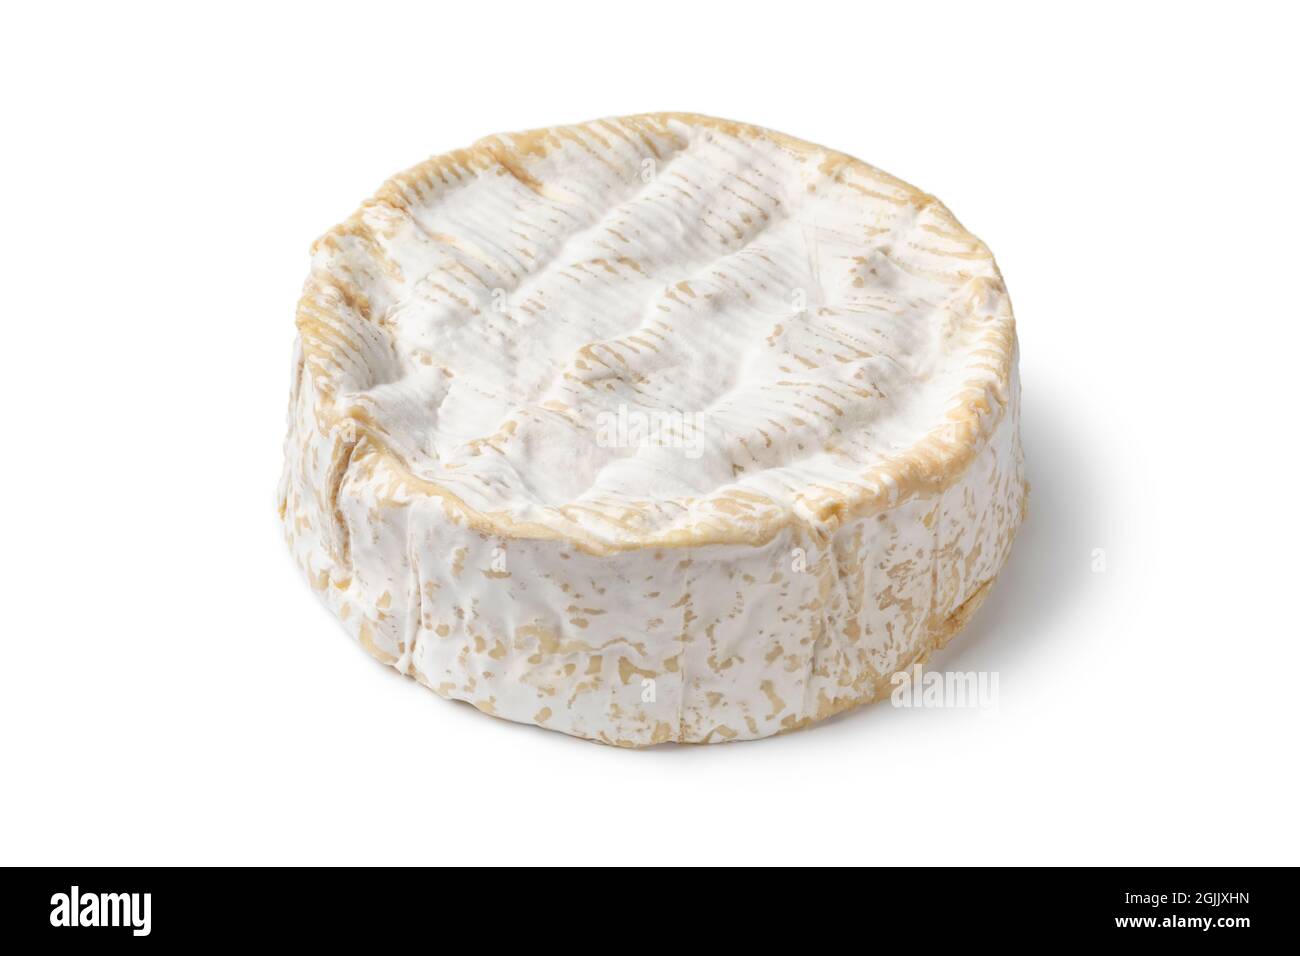 Traditional whole single French Camembert cheese isolated on white background Stock Photo